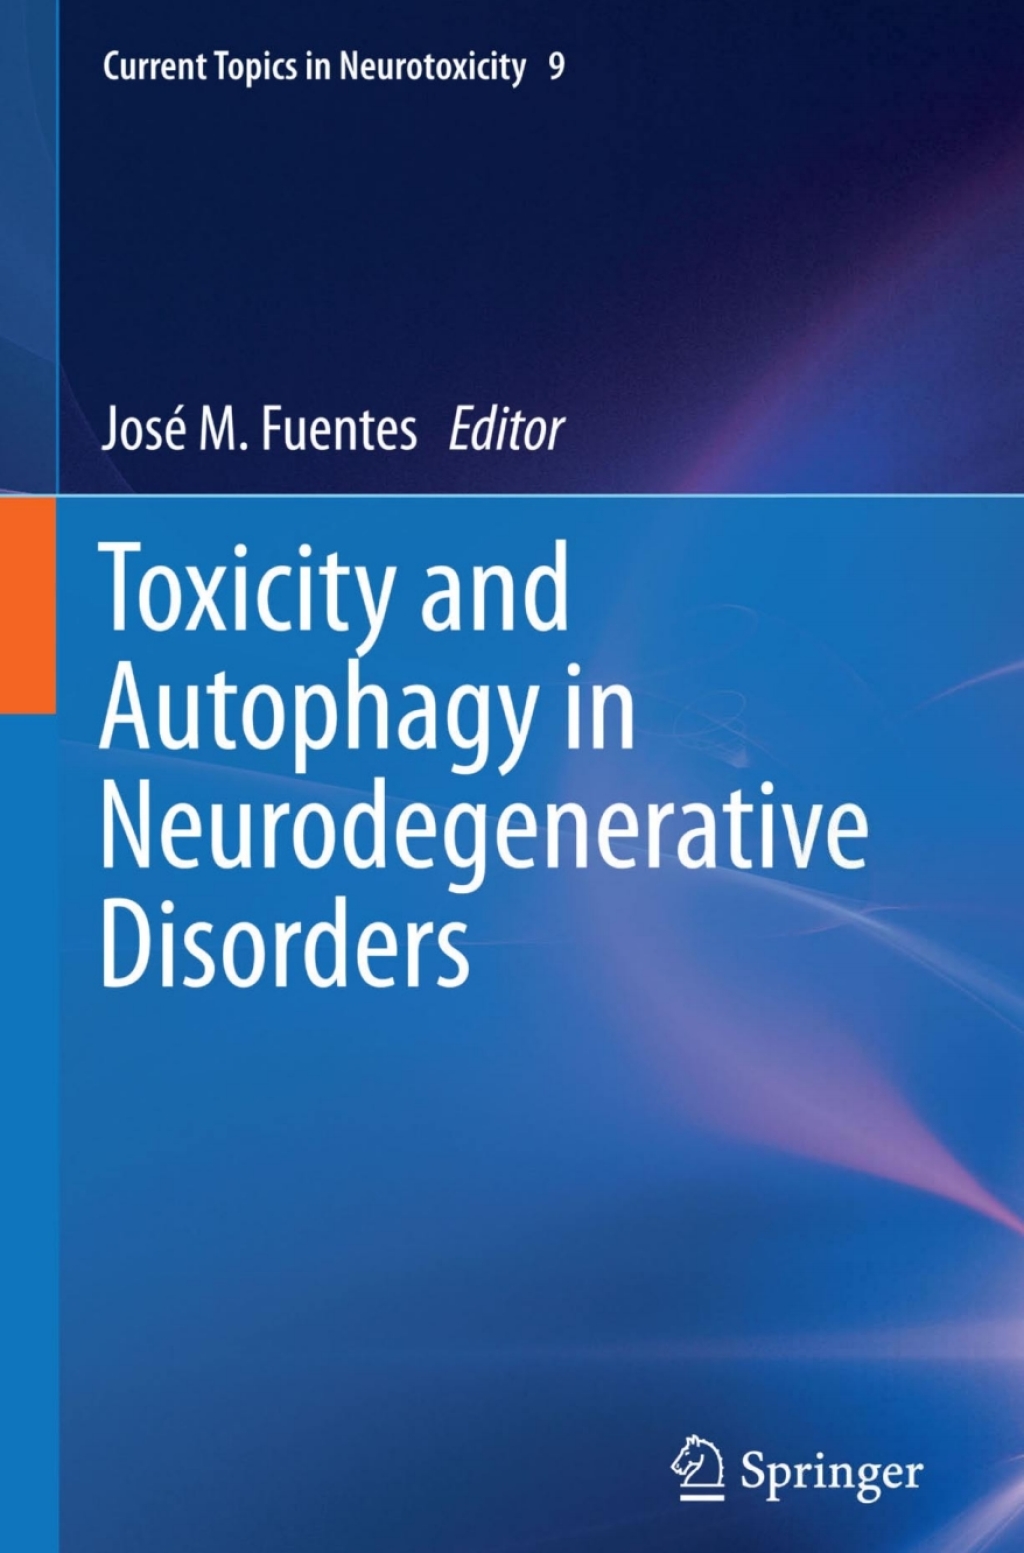 Toxicity and Autophagy in Neurodegenerative Disorders (eBook) - JosÃ© M. Fuentes